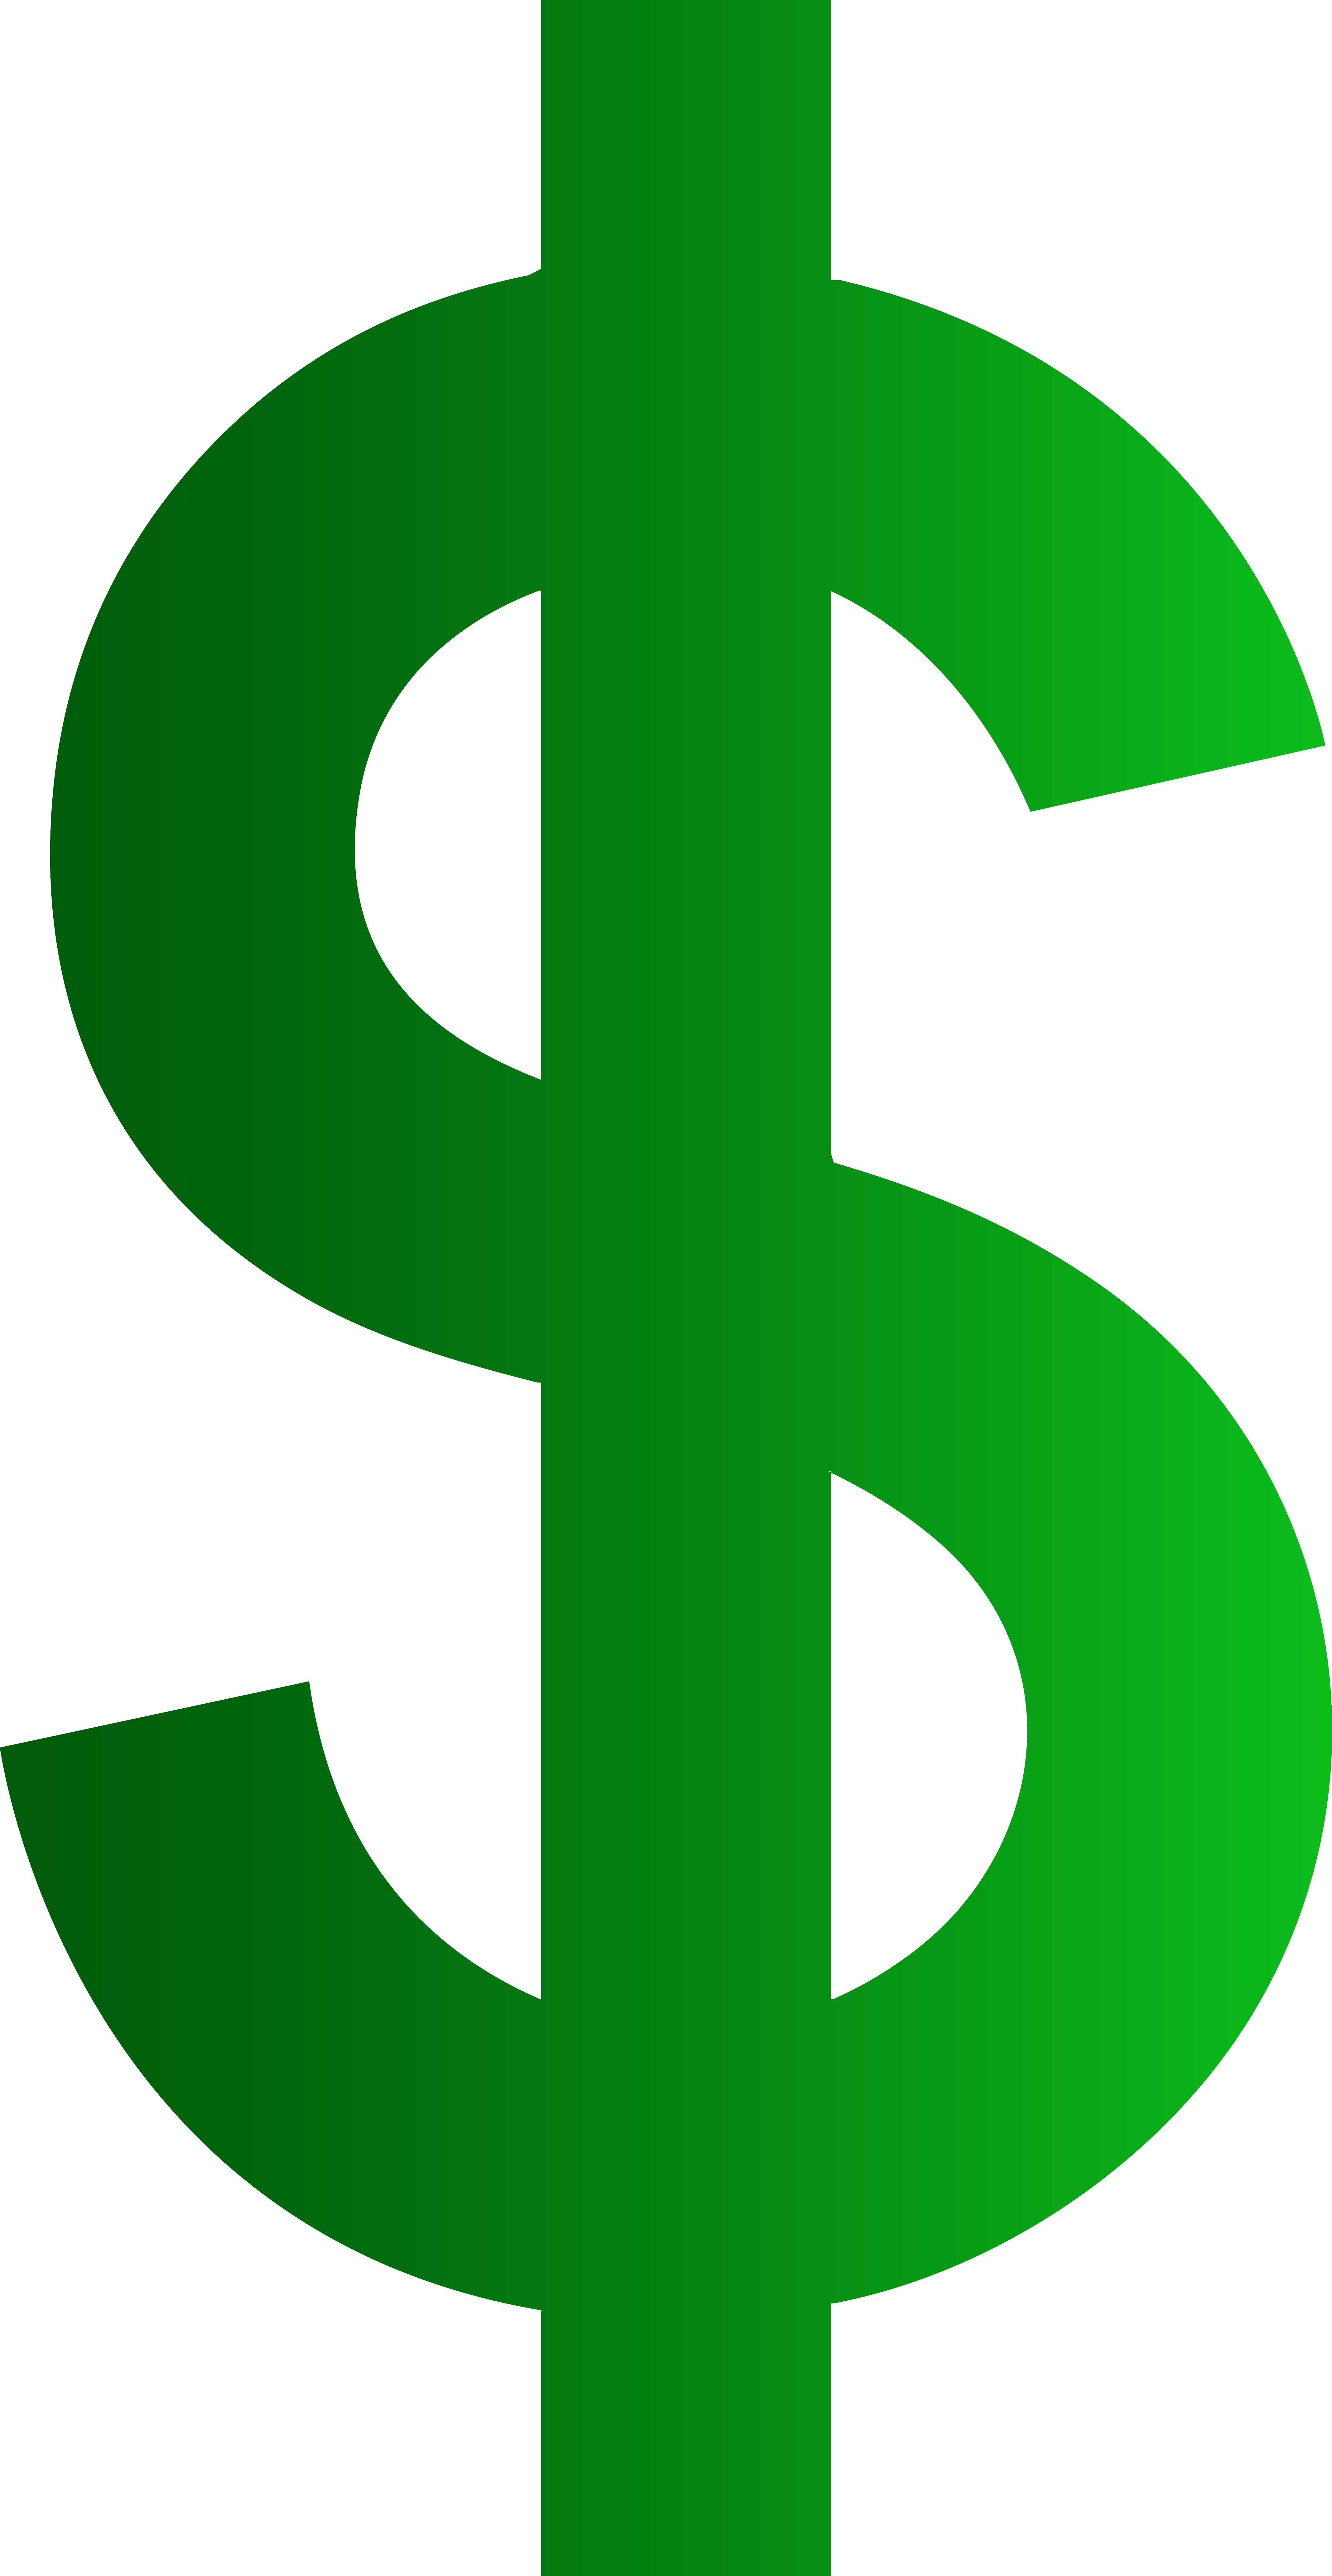 money-background-clipart-6.png